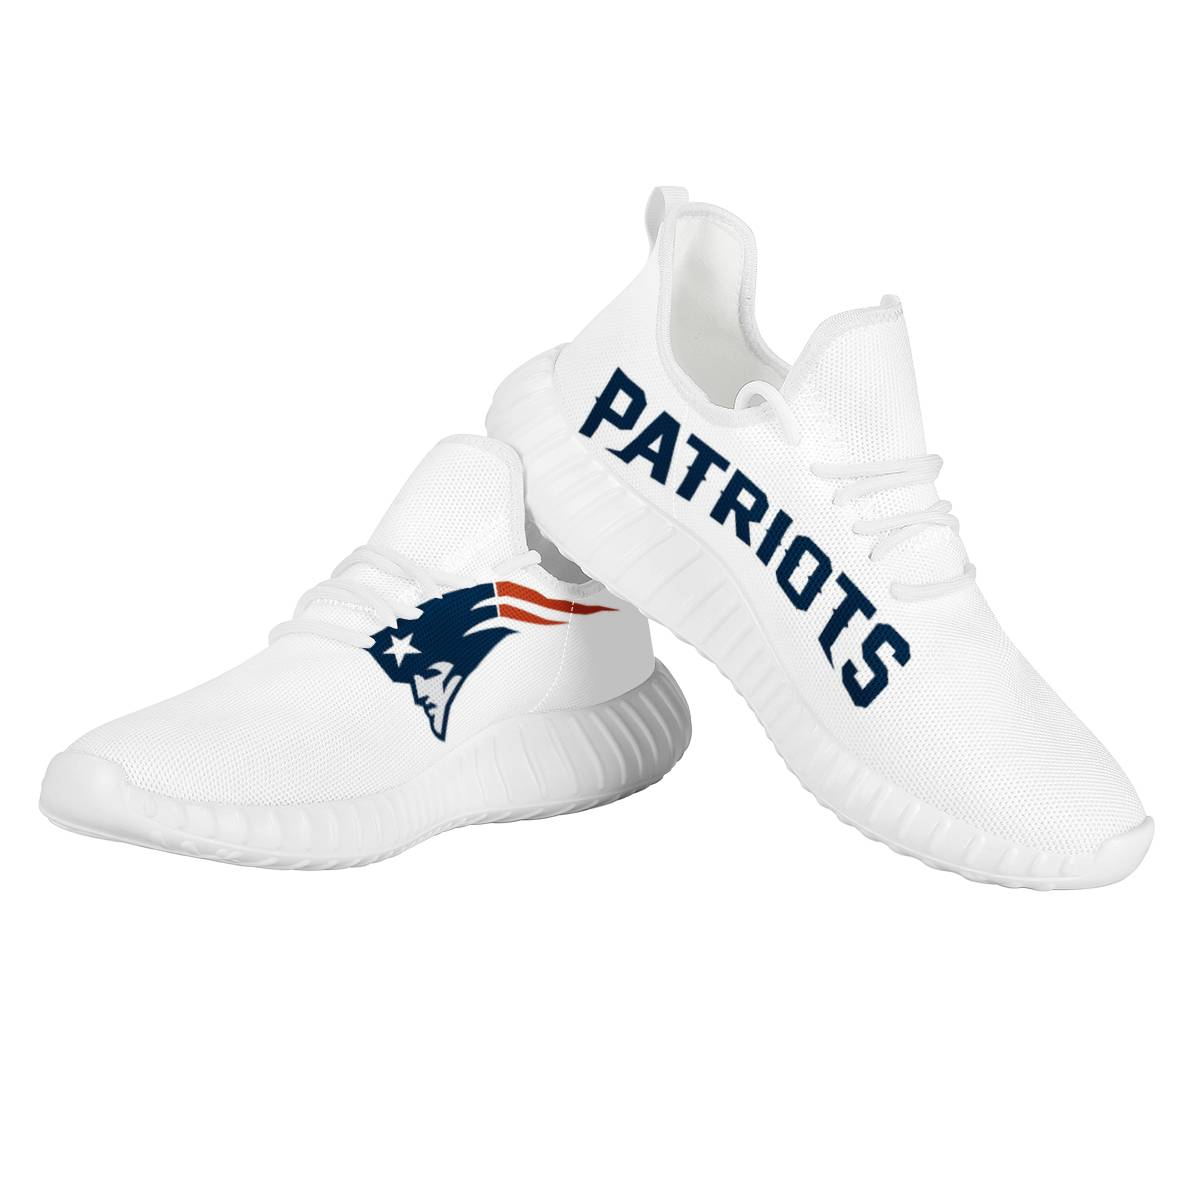 Men's New England Patriots Mesh Knit Sneakers/Shoes 015